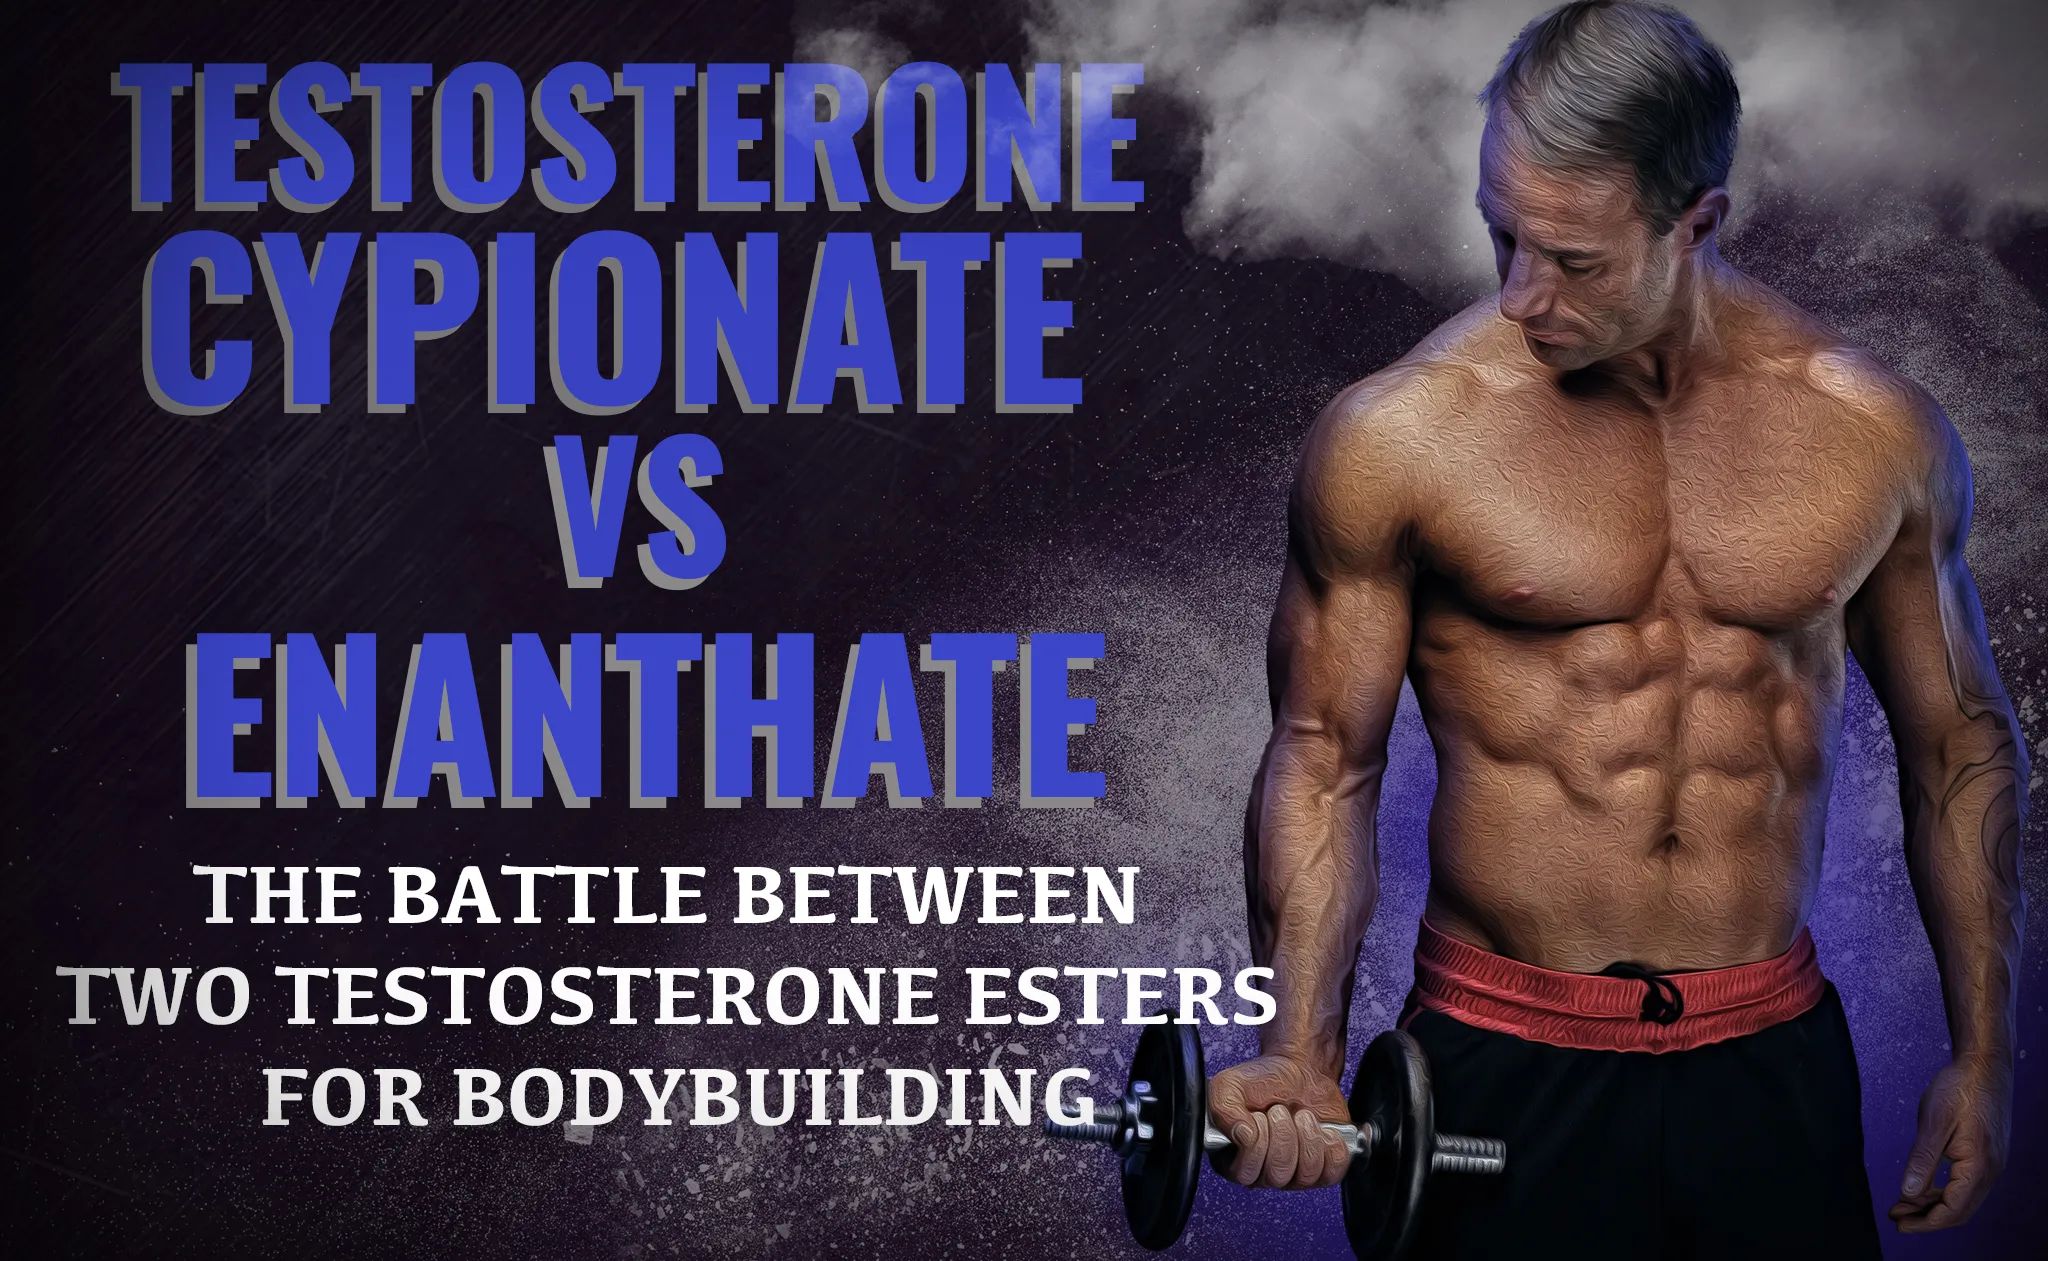 Testosterone Cypionate vs Enanthate – The Battle Between Two Testosterone Esters for Bodybuilding